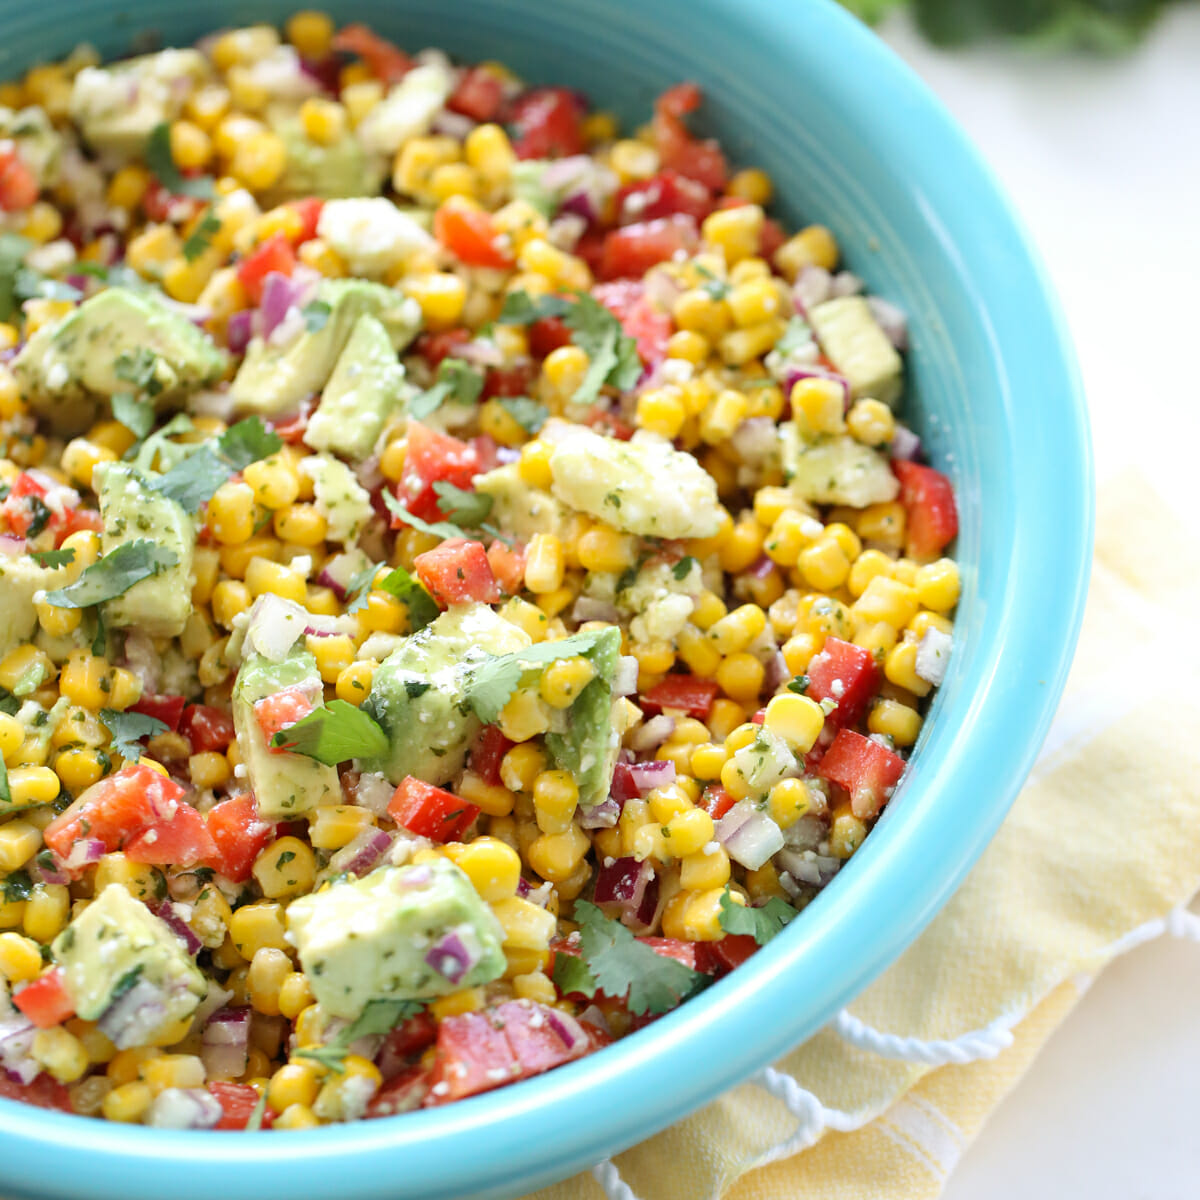 Fresh corn, avocados, and vegetables in a blue bowl